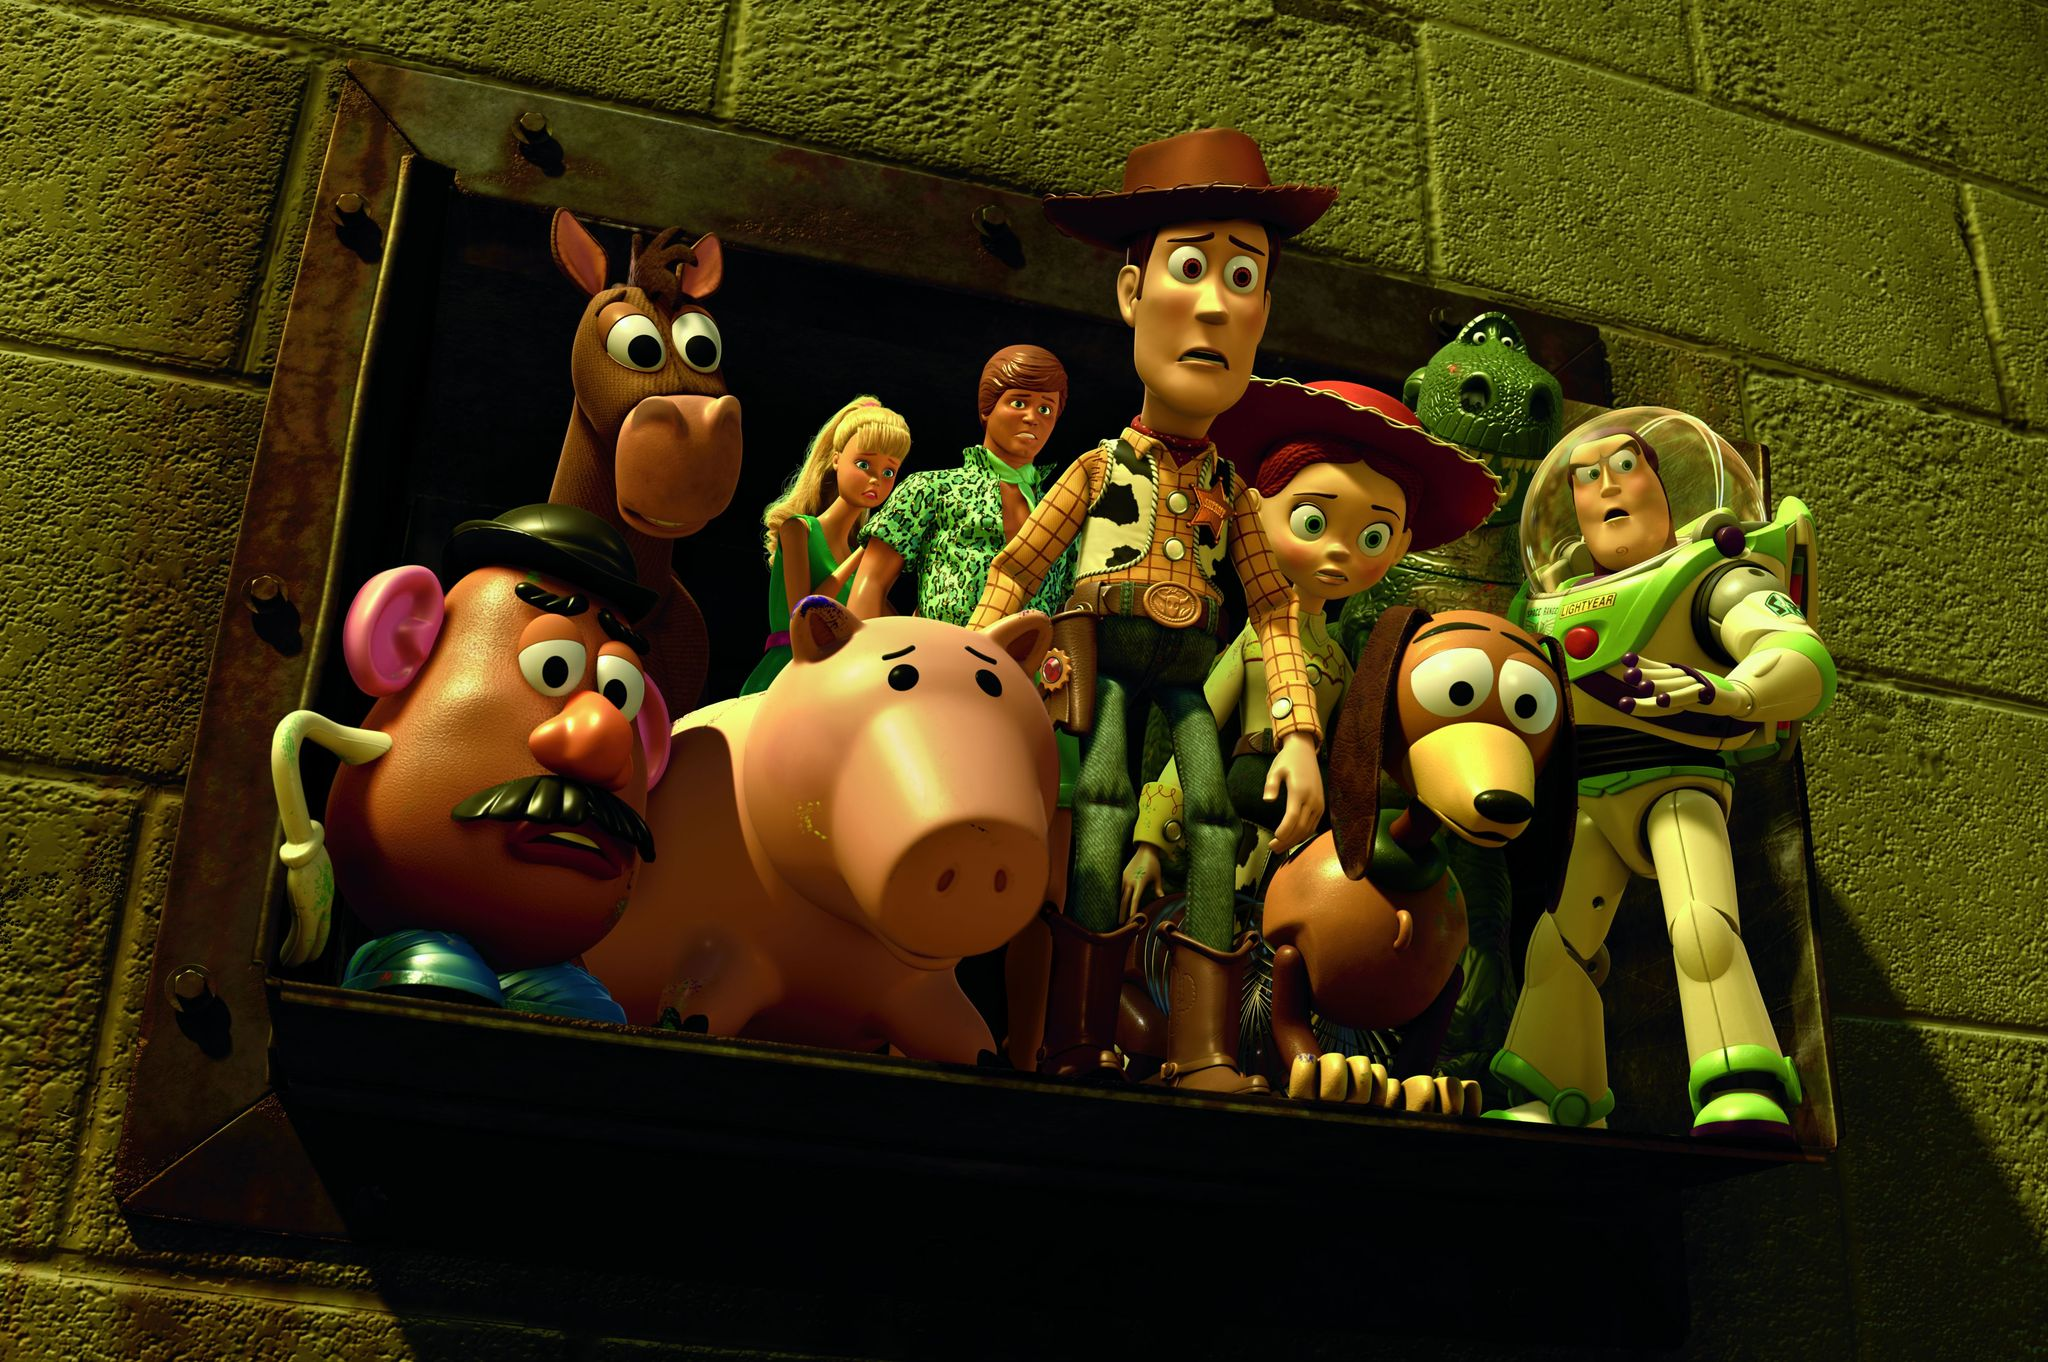 Review: Toy Story 3 (2010)